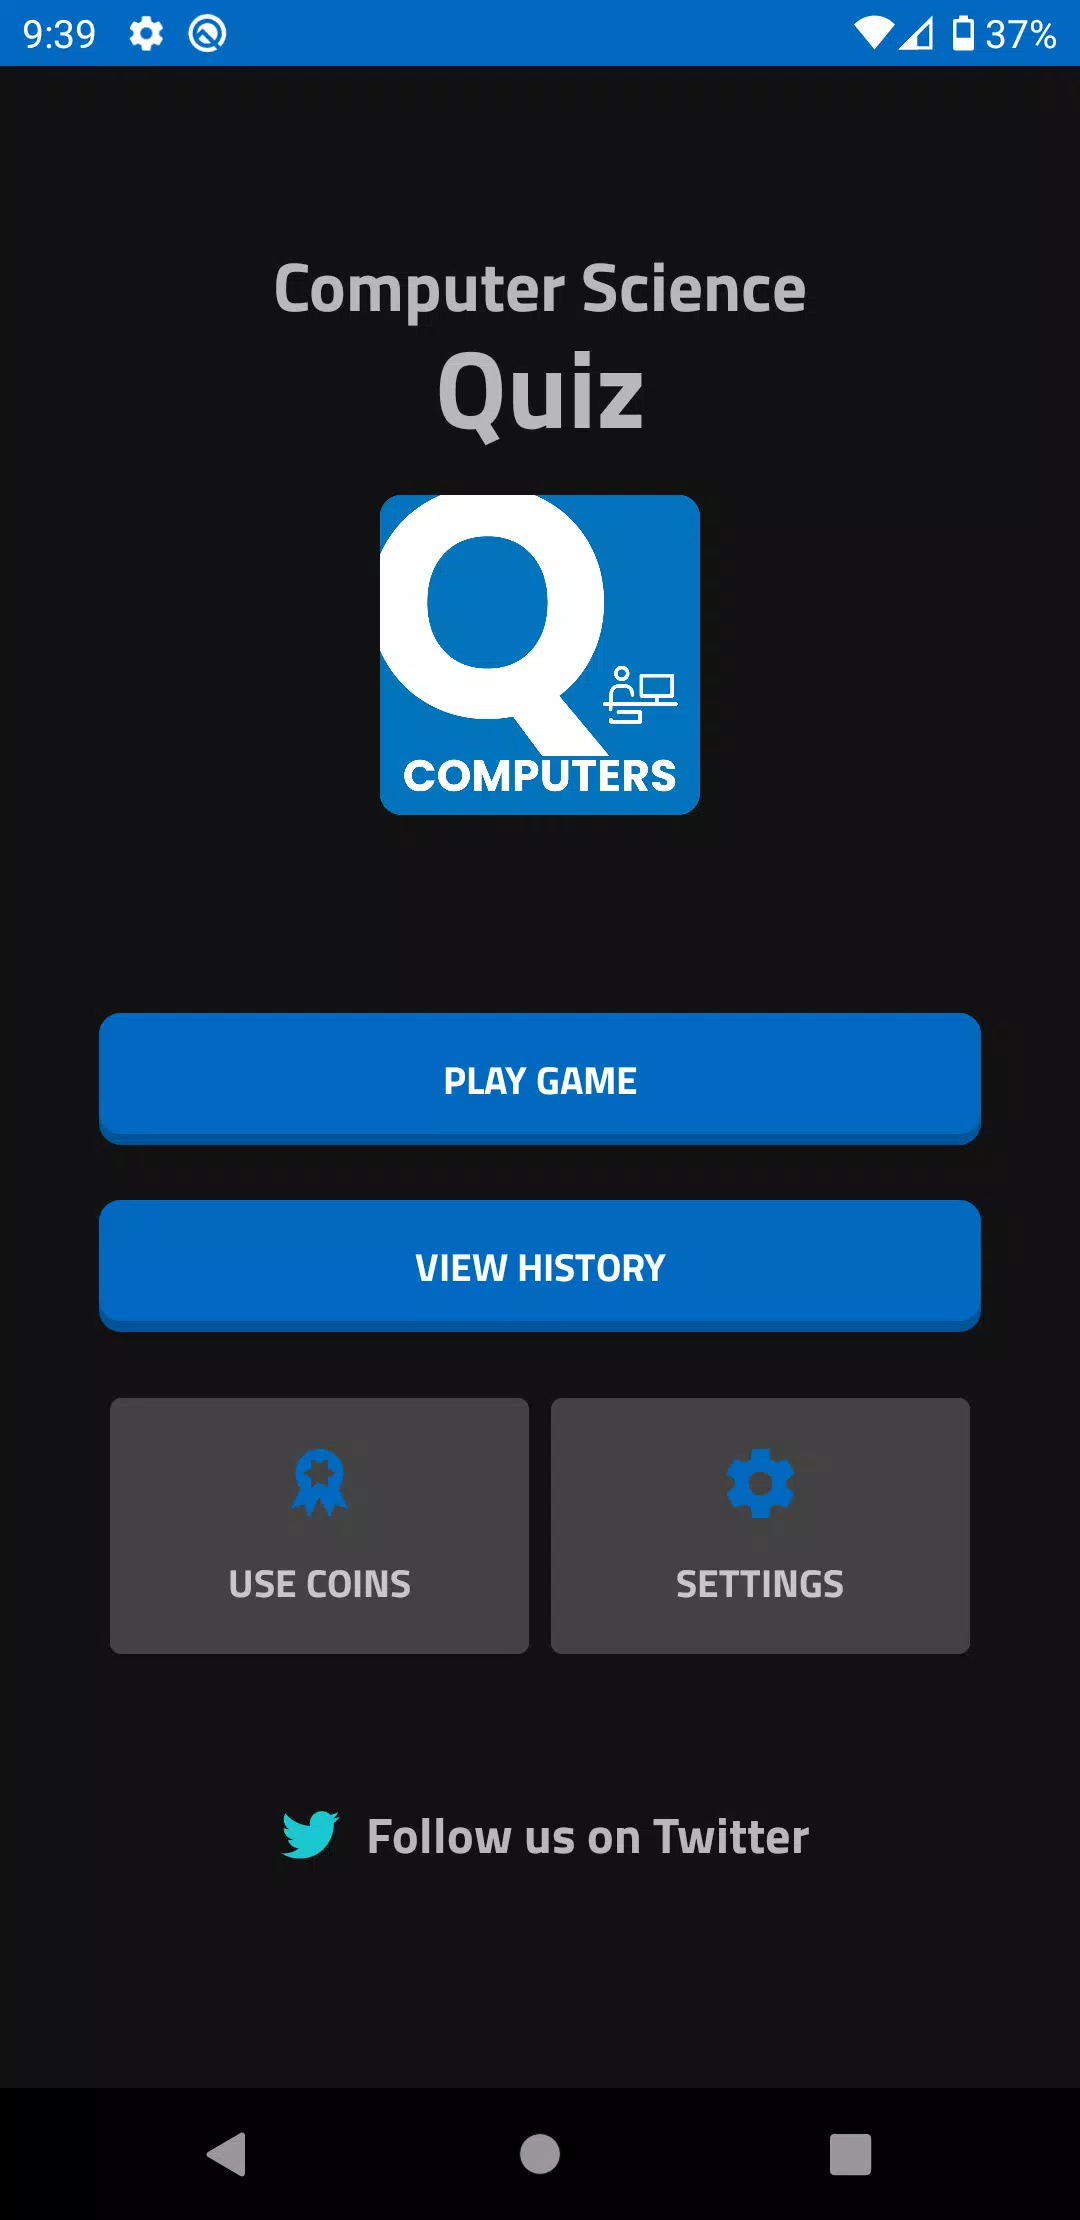 Computer Science - Tech Quiz Apk For Android Download